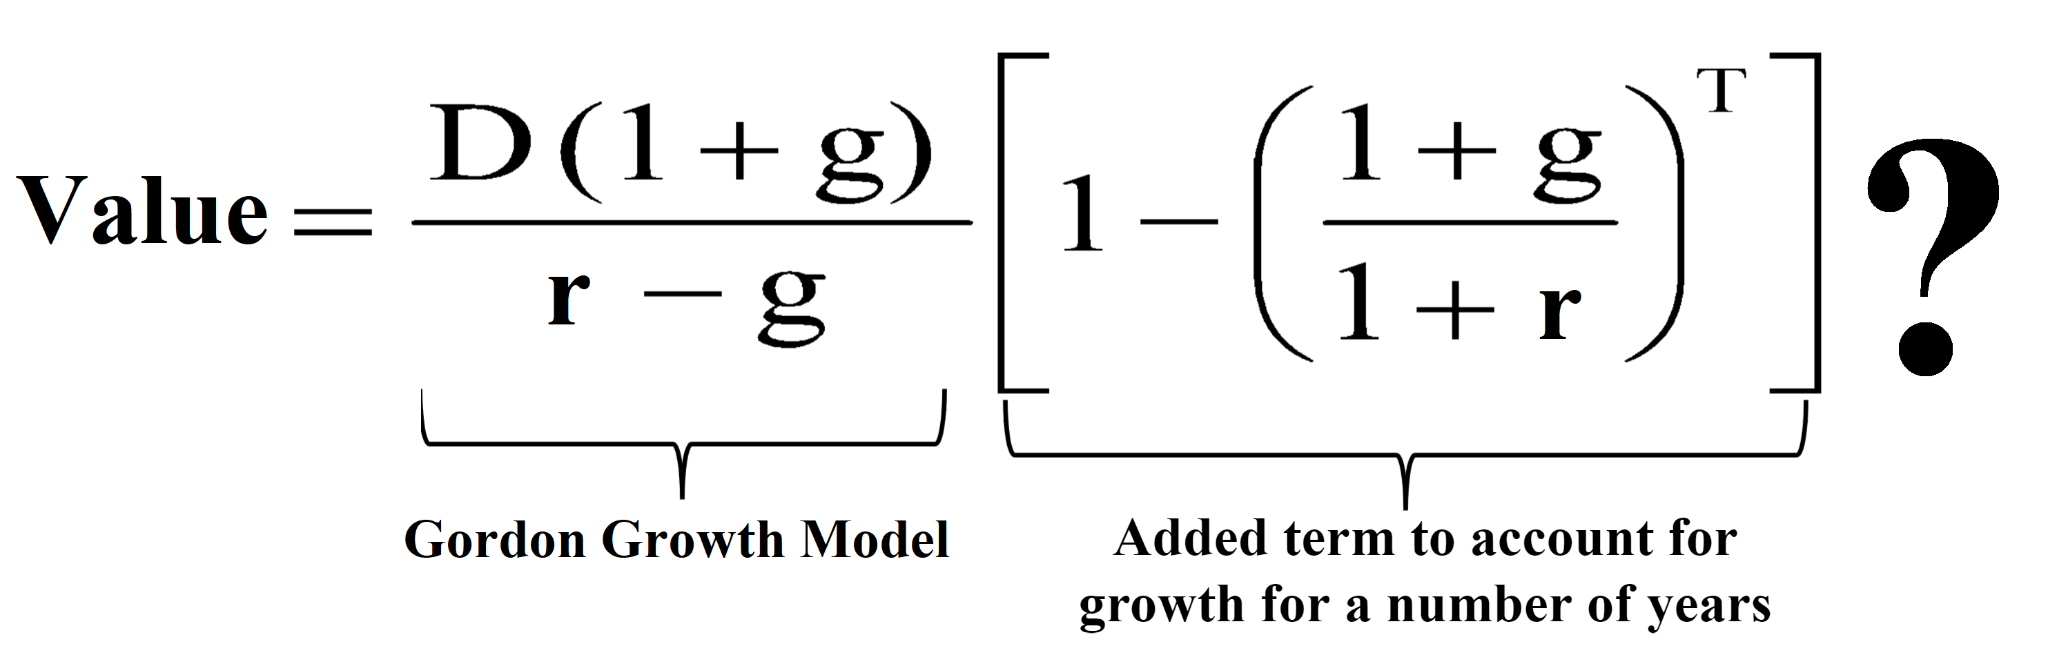 The Constant Growth Dividend Discount Model takes the Gordon Growth Model one step further. It uses is dubious at best.